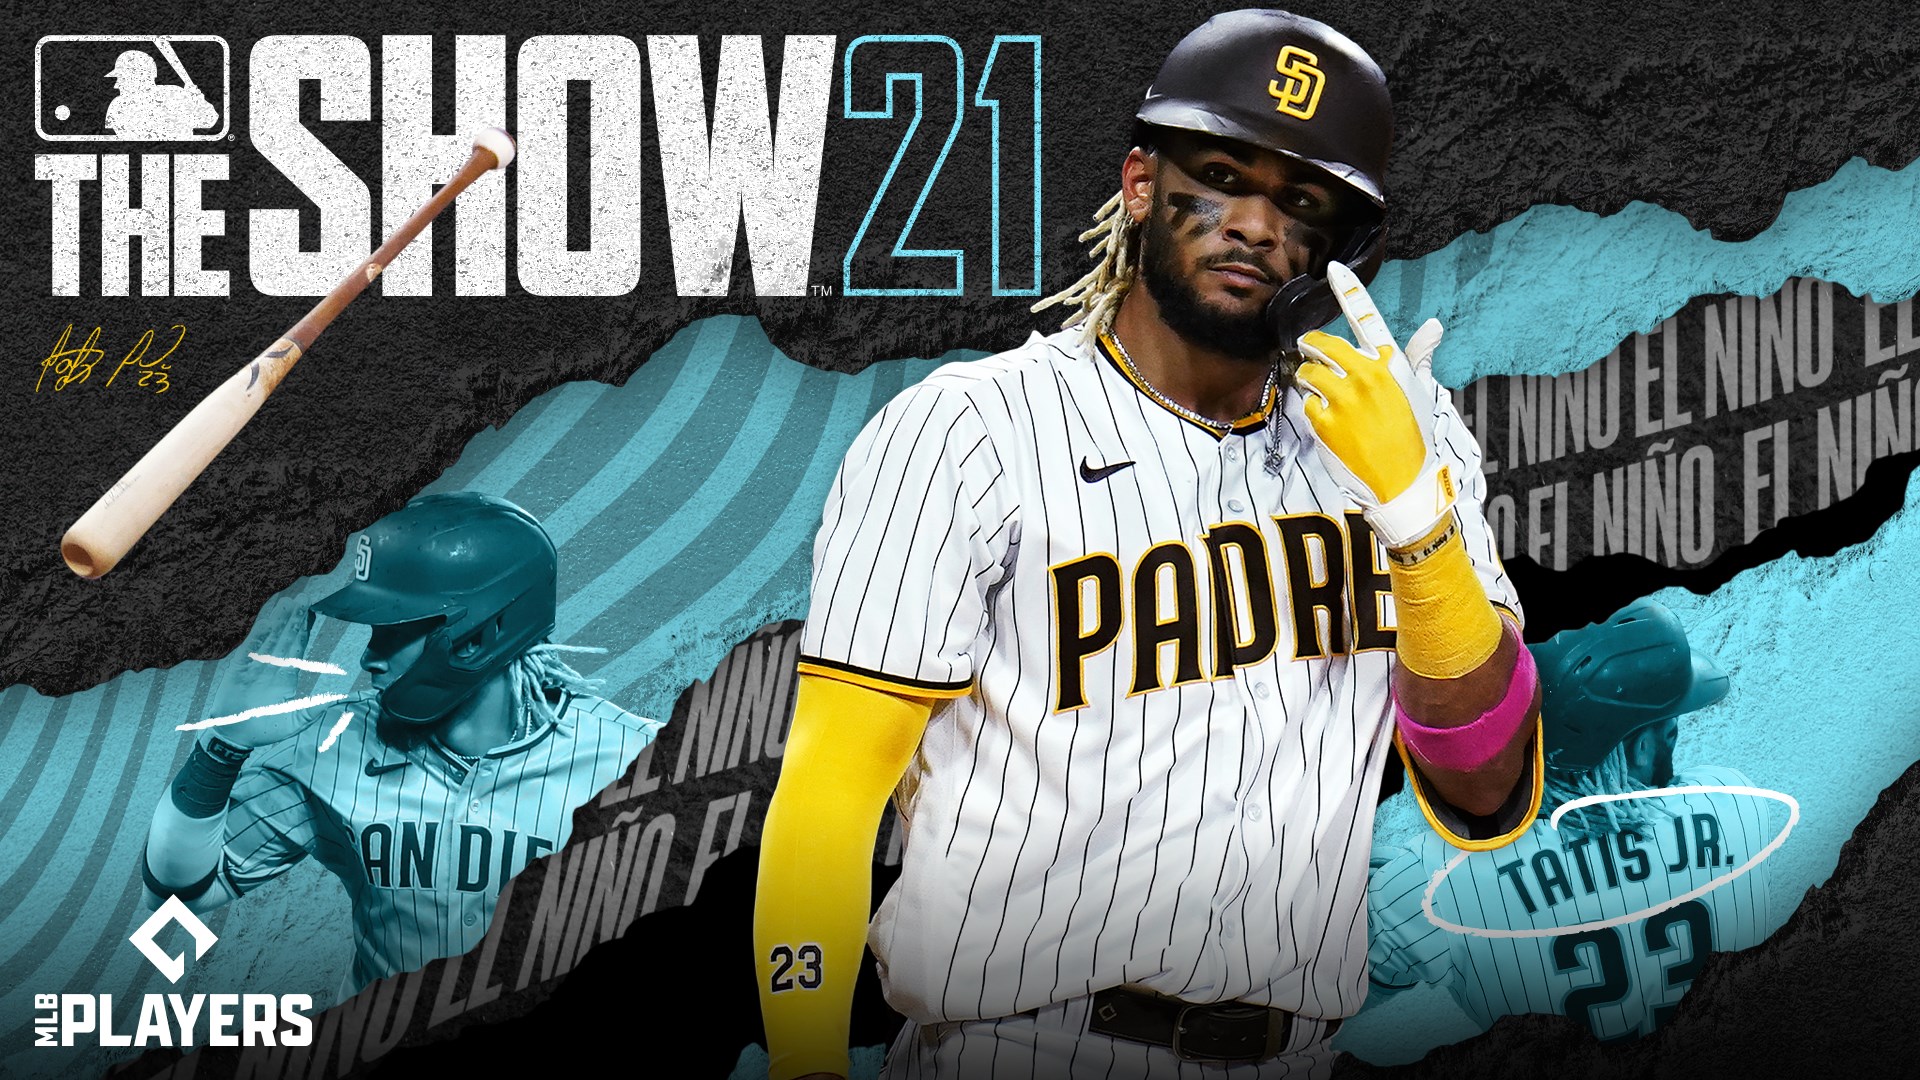 Stubs (67,500) for MLB The Show 21